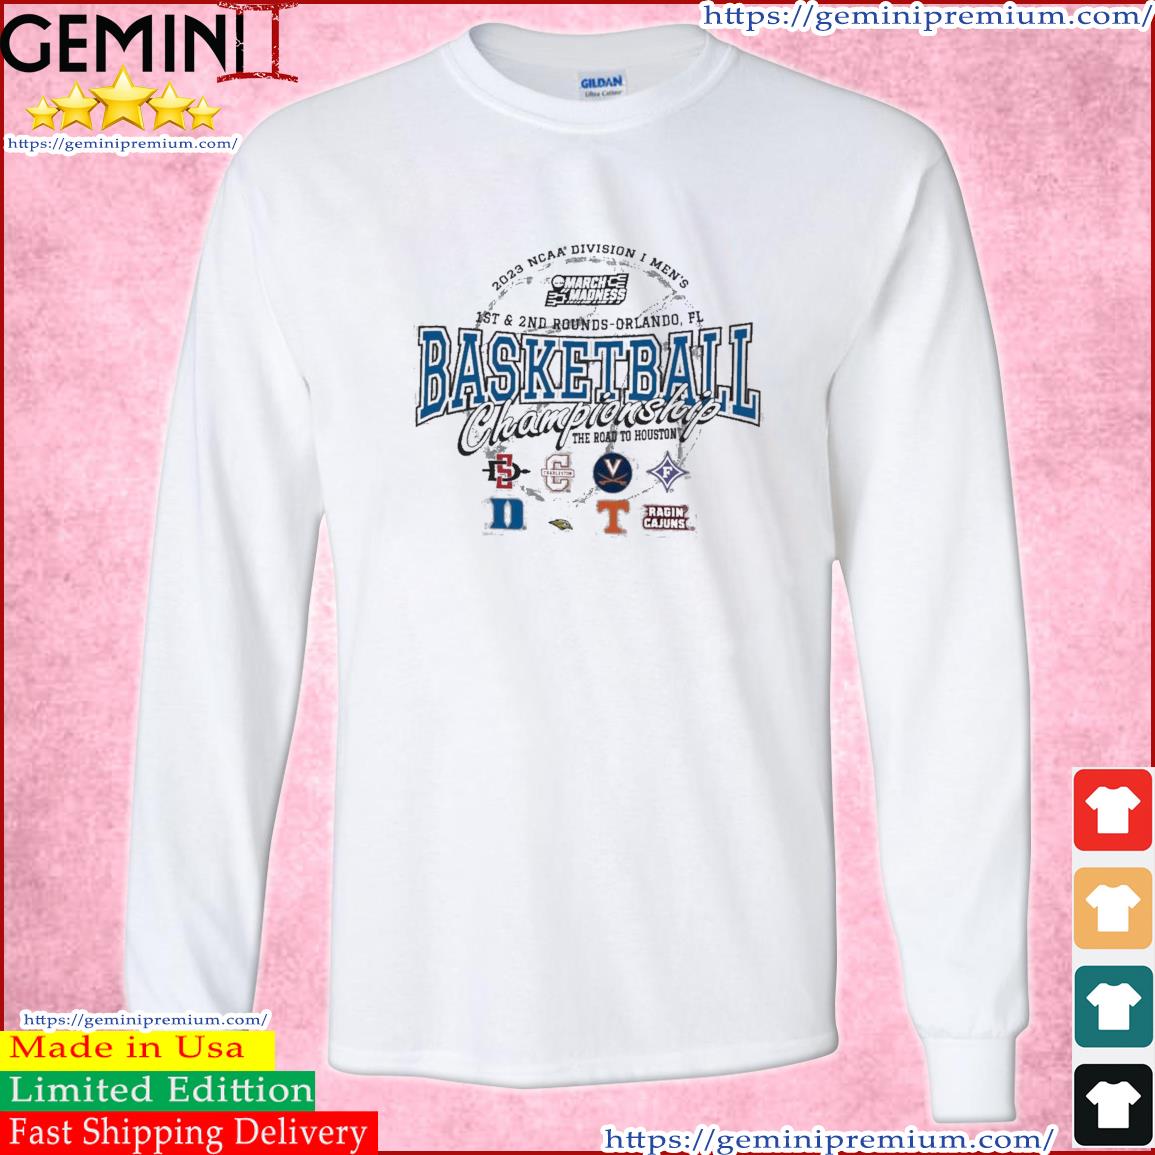 2023 NCAA Division I Men's Basketball 1st & 2nd Rounds Orlando The Road To Houston Shirt Long Sleeve Tee